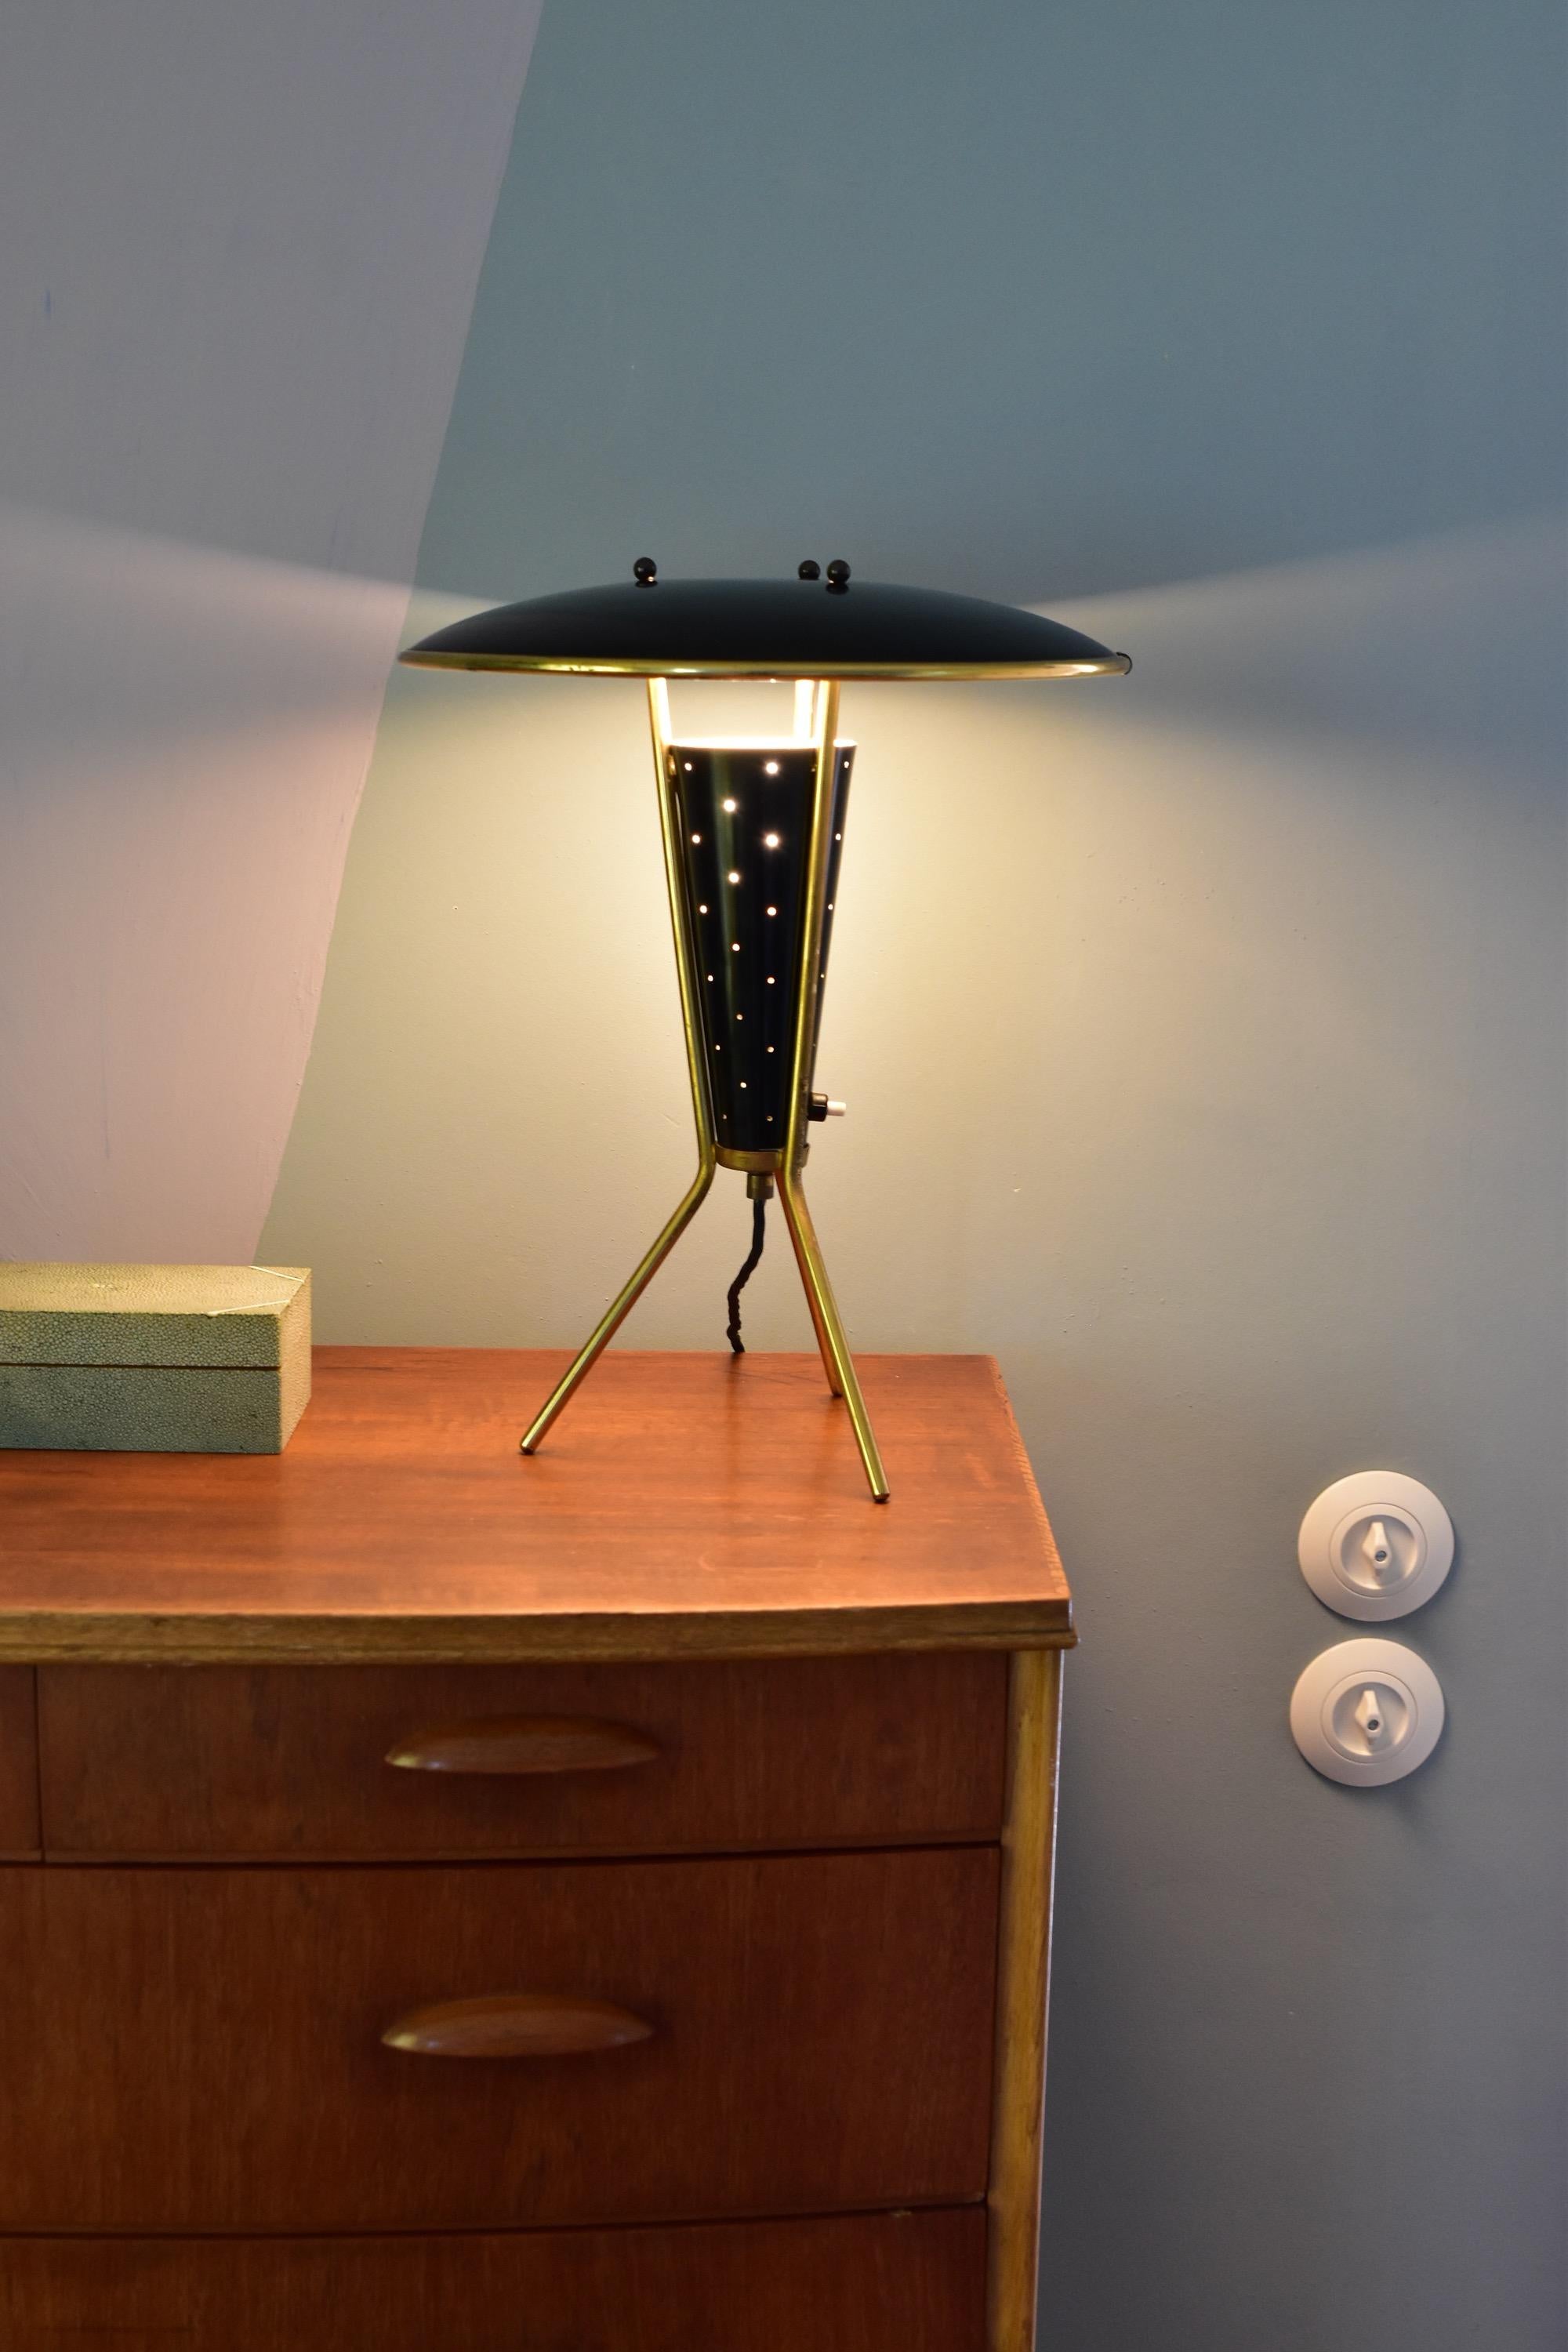 Midcentury tripod table in brass and black lacquered shade. The central black perforated cone houses the light source made soft indirect light. Very nice condition with beautiful patina and some loss of paint on the white reflector inside. With